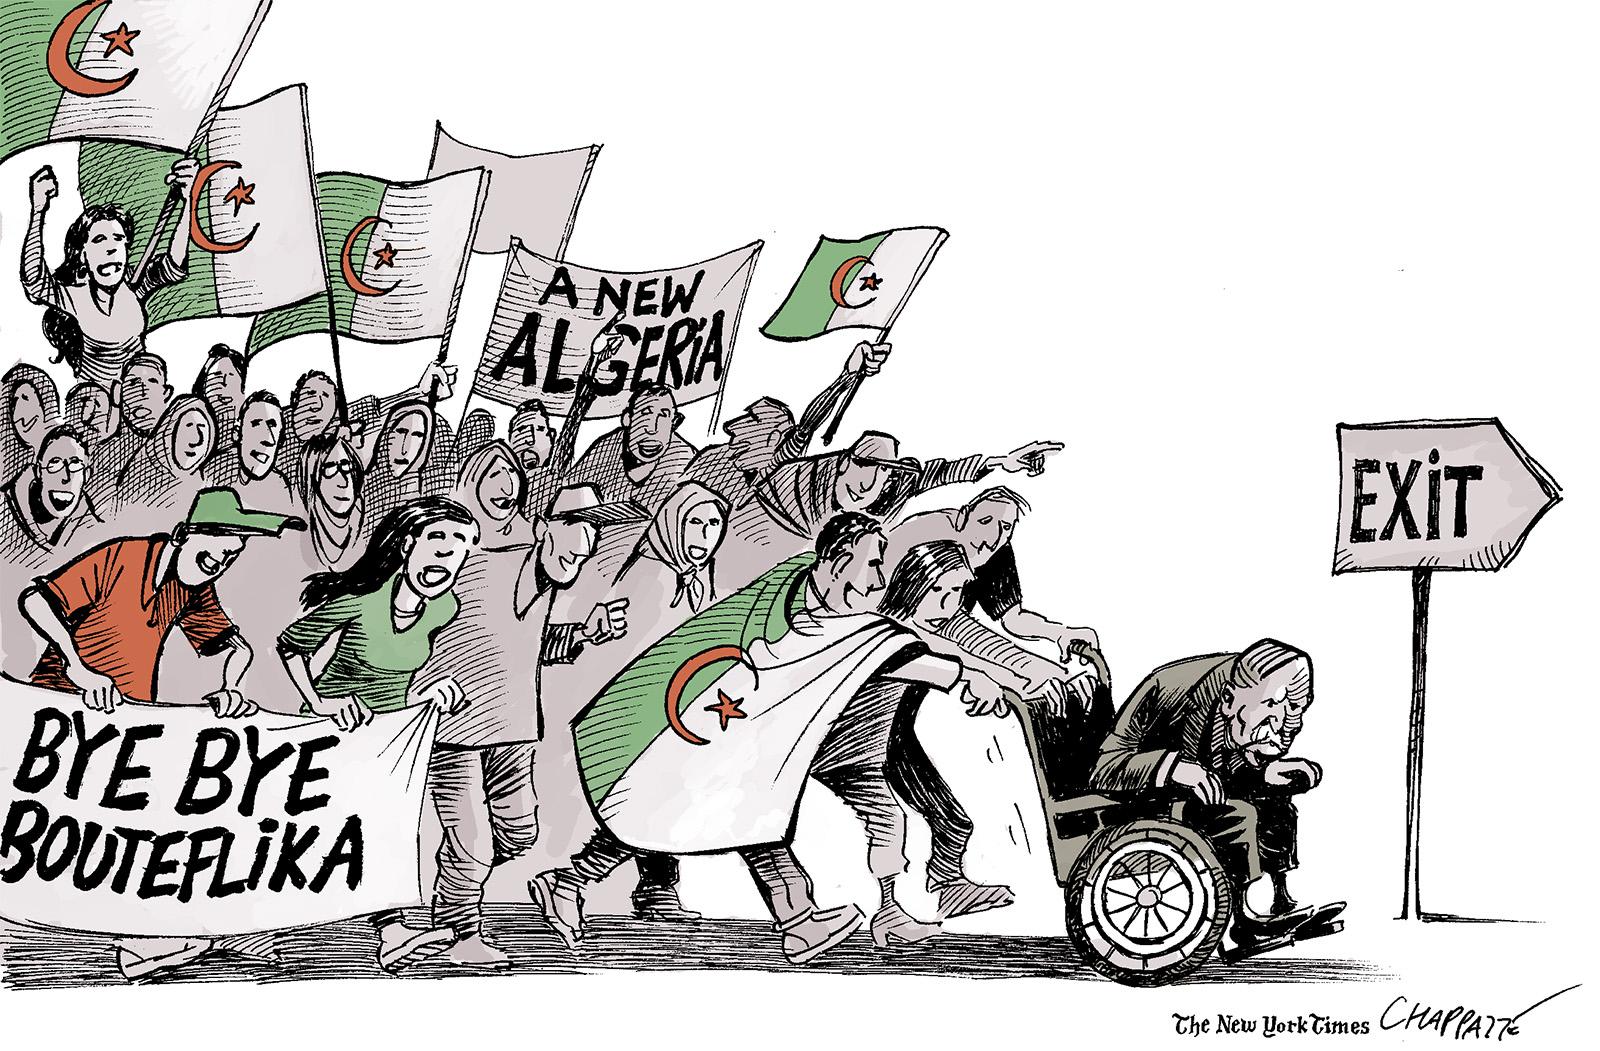 Algeria’s old ruler is out